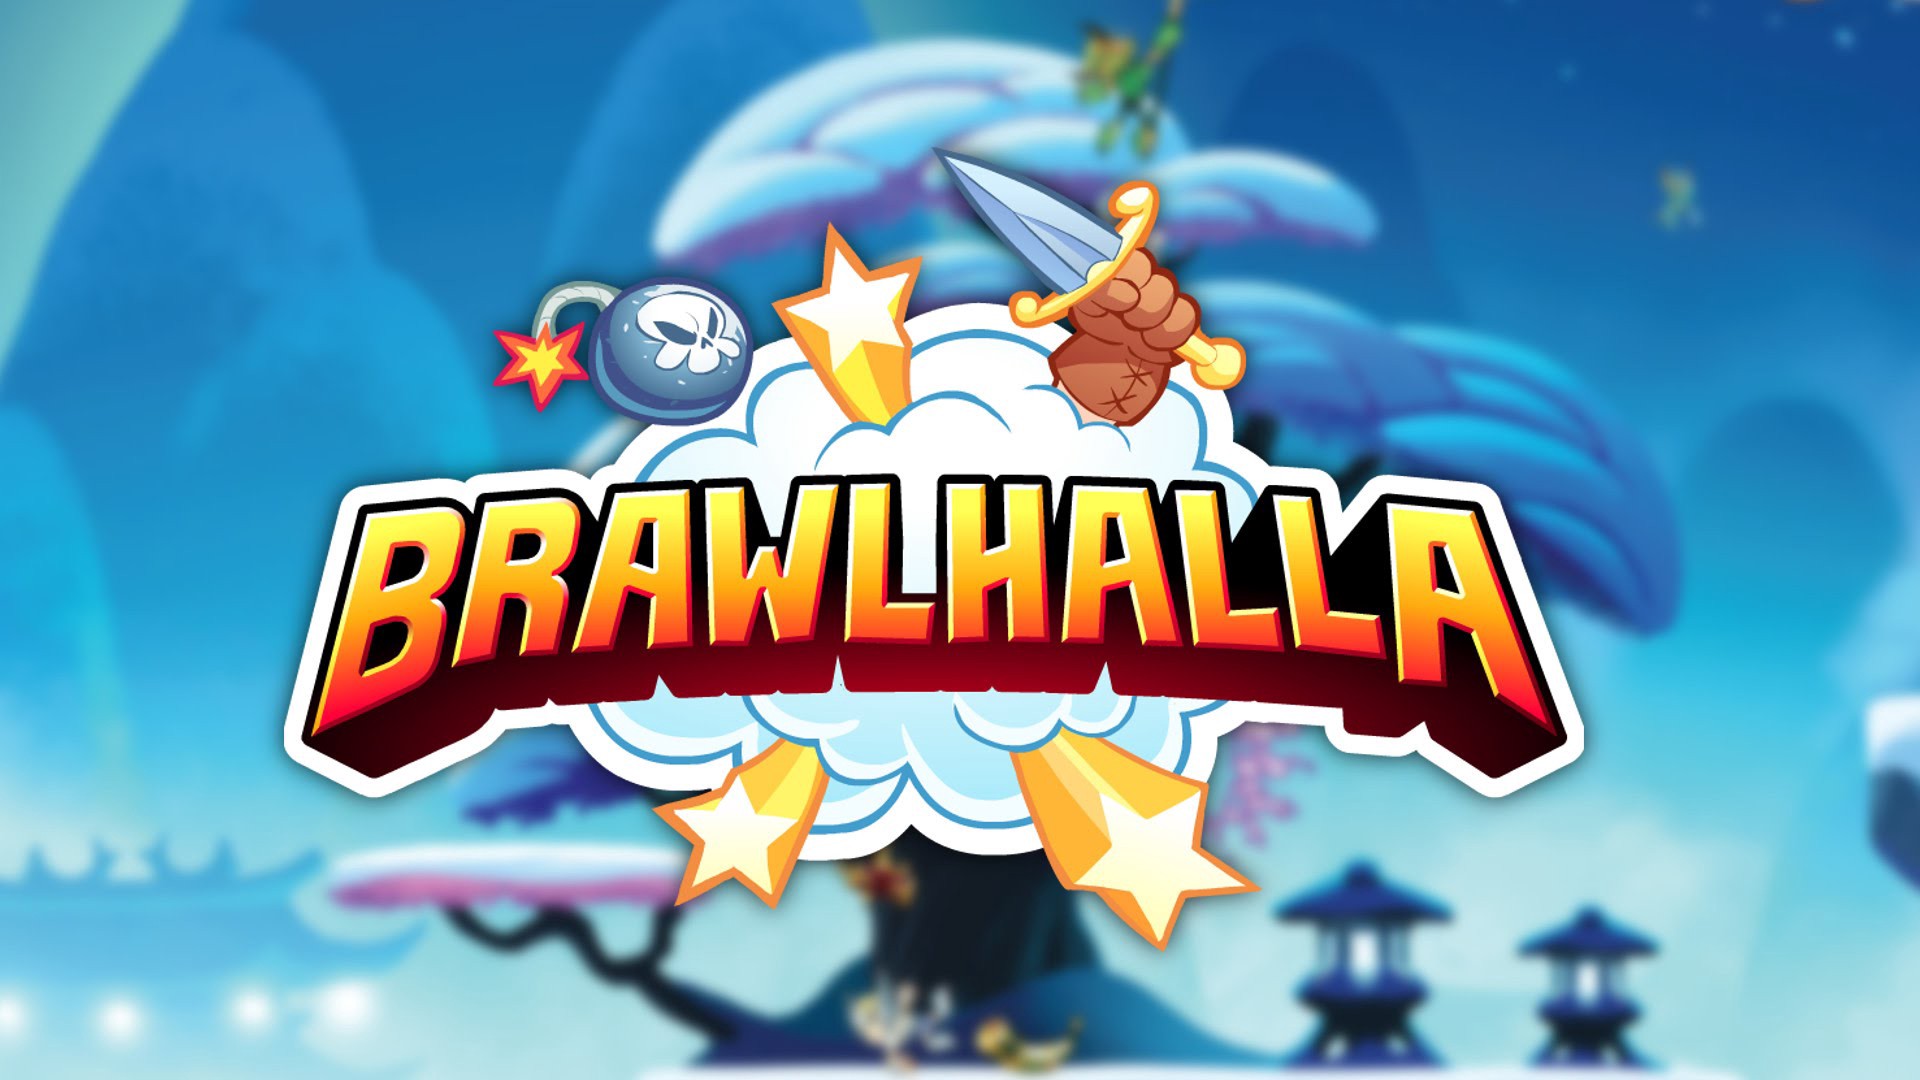 Changes to our Brawlhalla roster